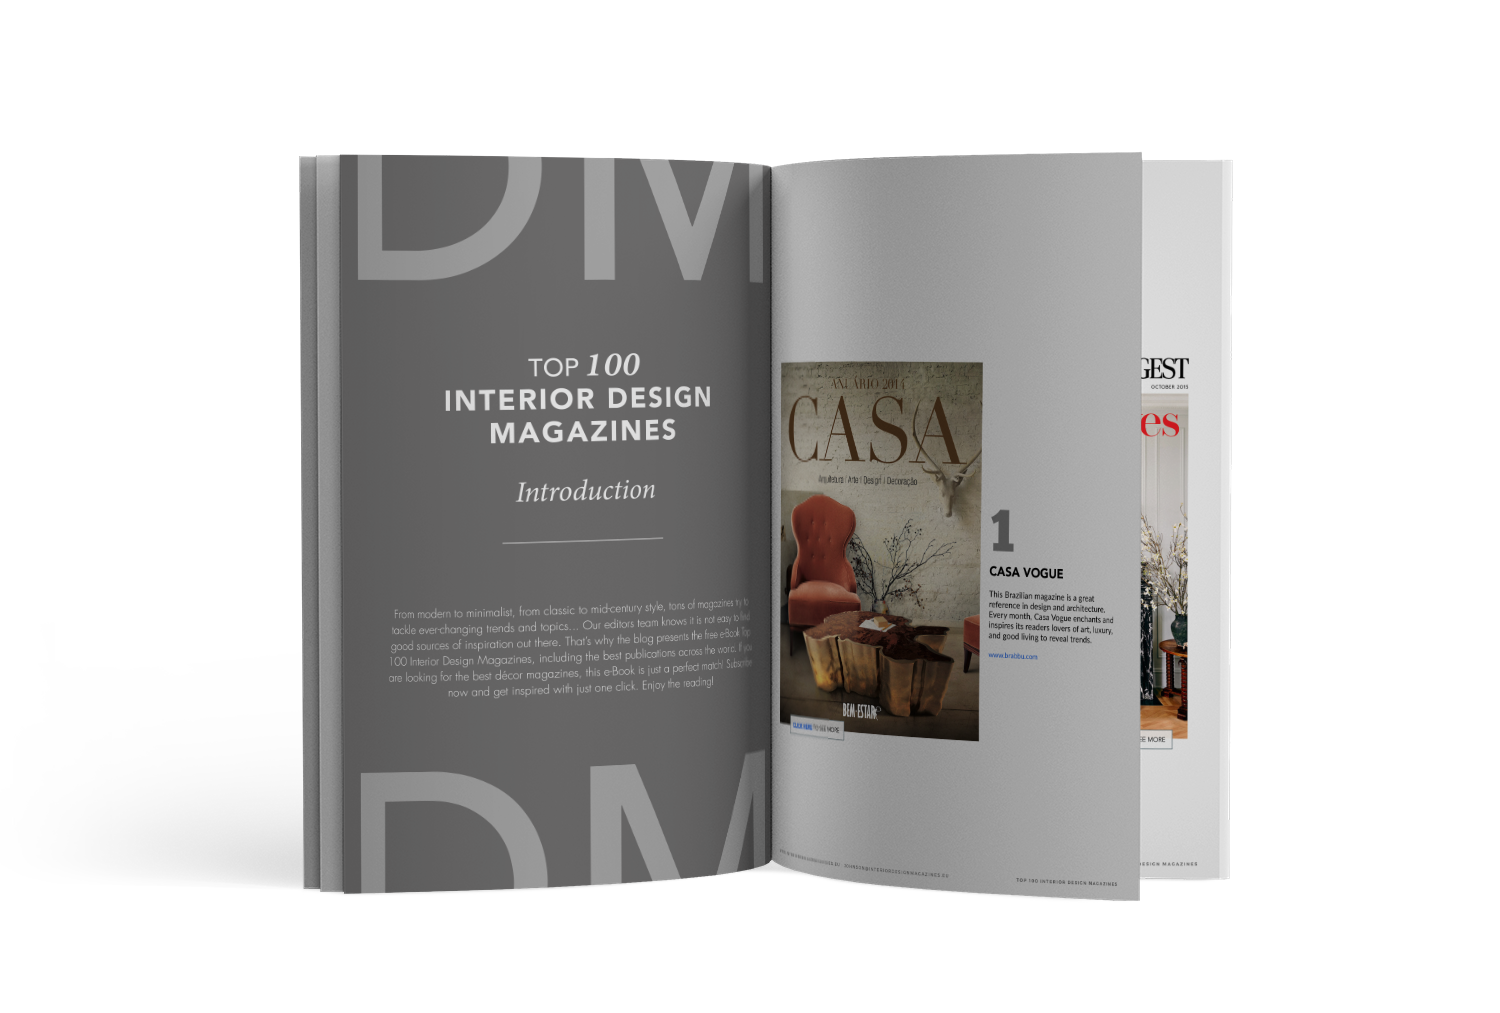 DOWNLOAD FREE EBOOK - Top 100 Interior Design Magazines Every Interior Designer Should Know ➤ To see more news about the Interior Magazines in the world visit us at www.interiordesignmagazines.eu #interiordesignmagazines #designmagazines #interiordesign @imagazines